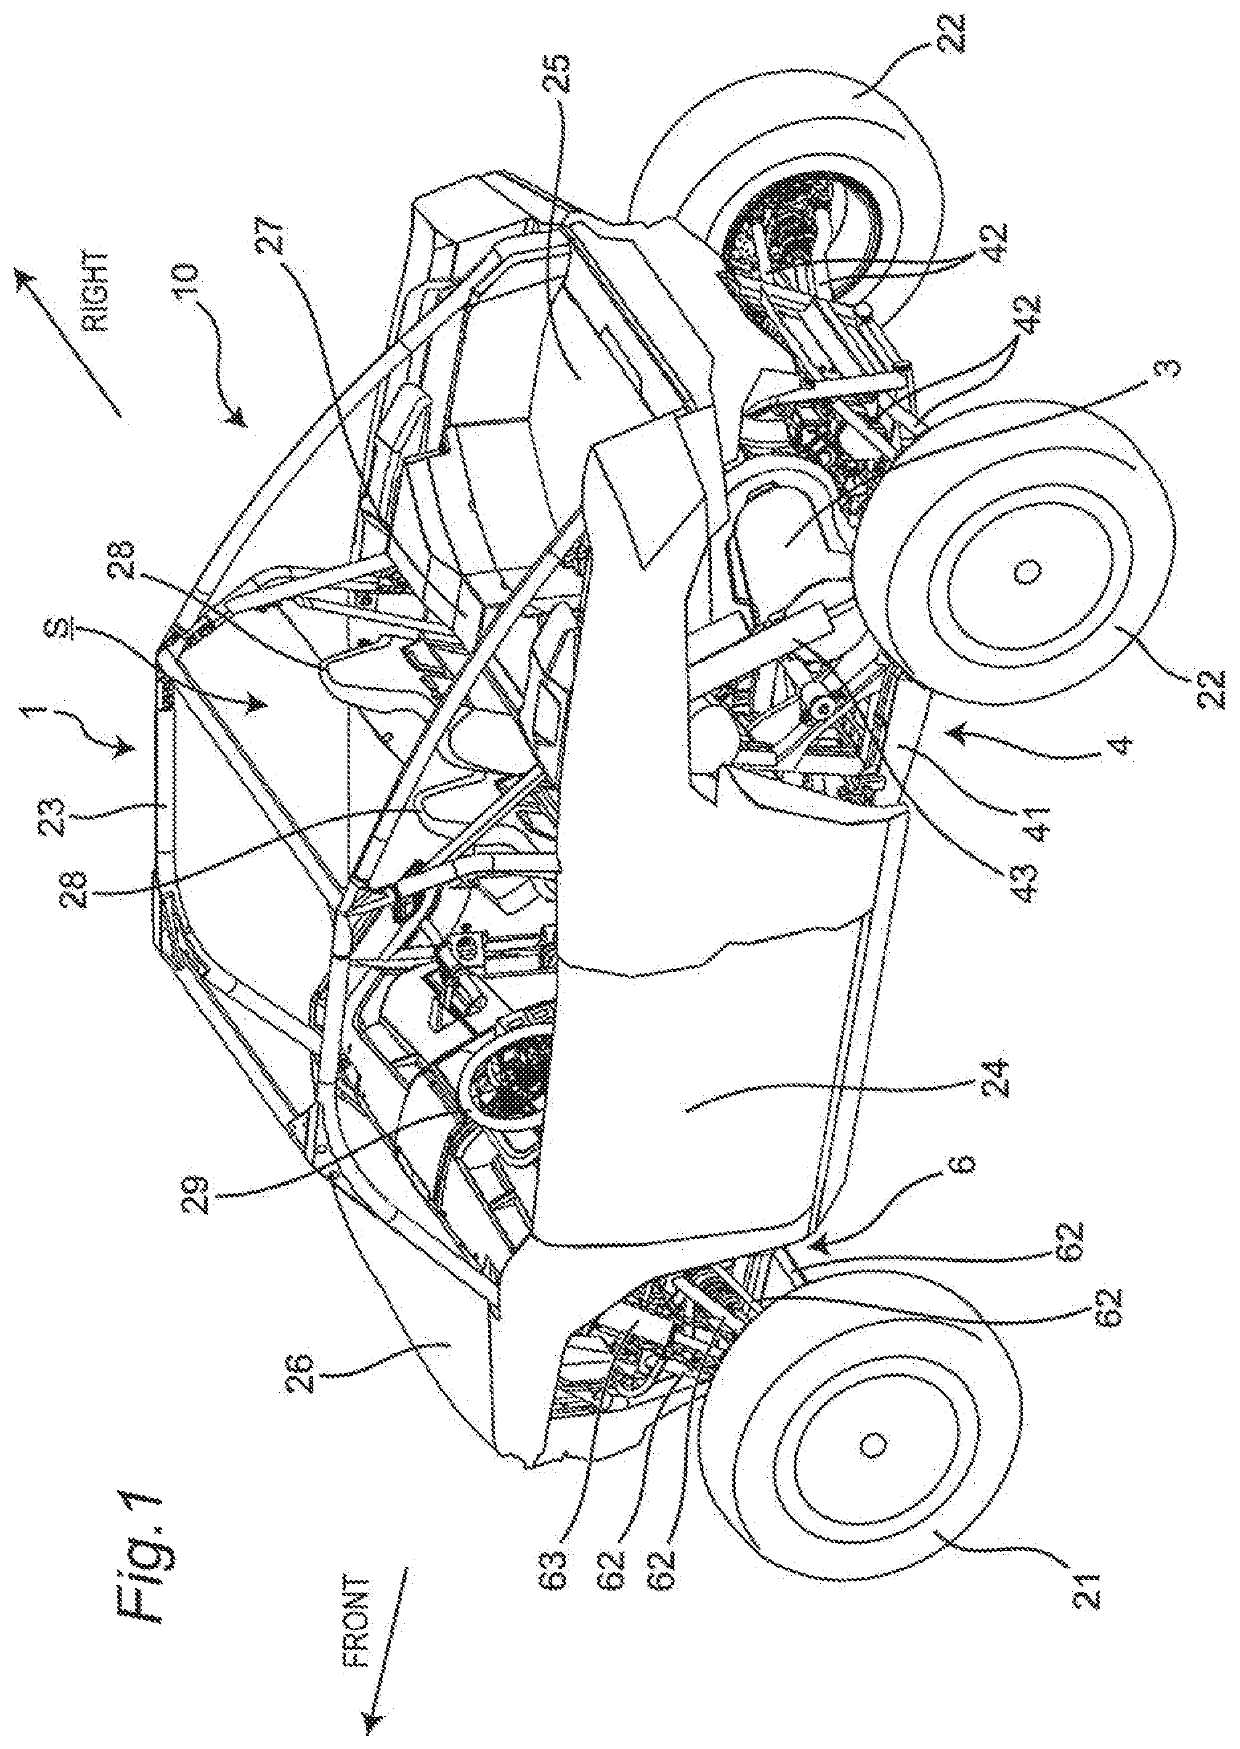 Attaching structure for stabilizer of utility vehicle